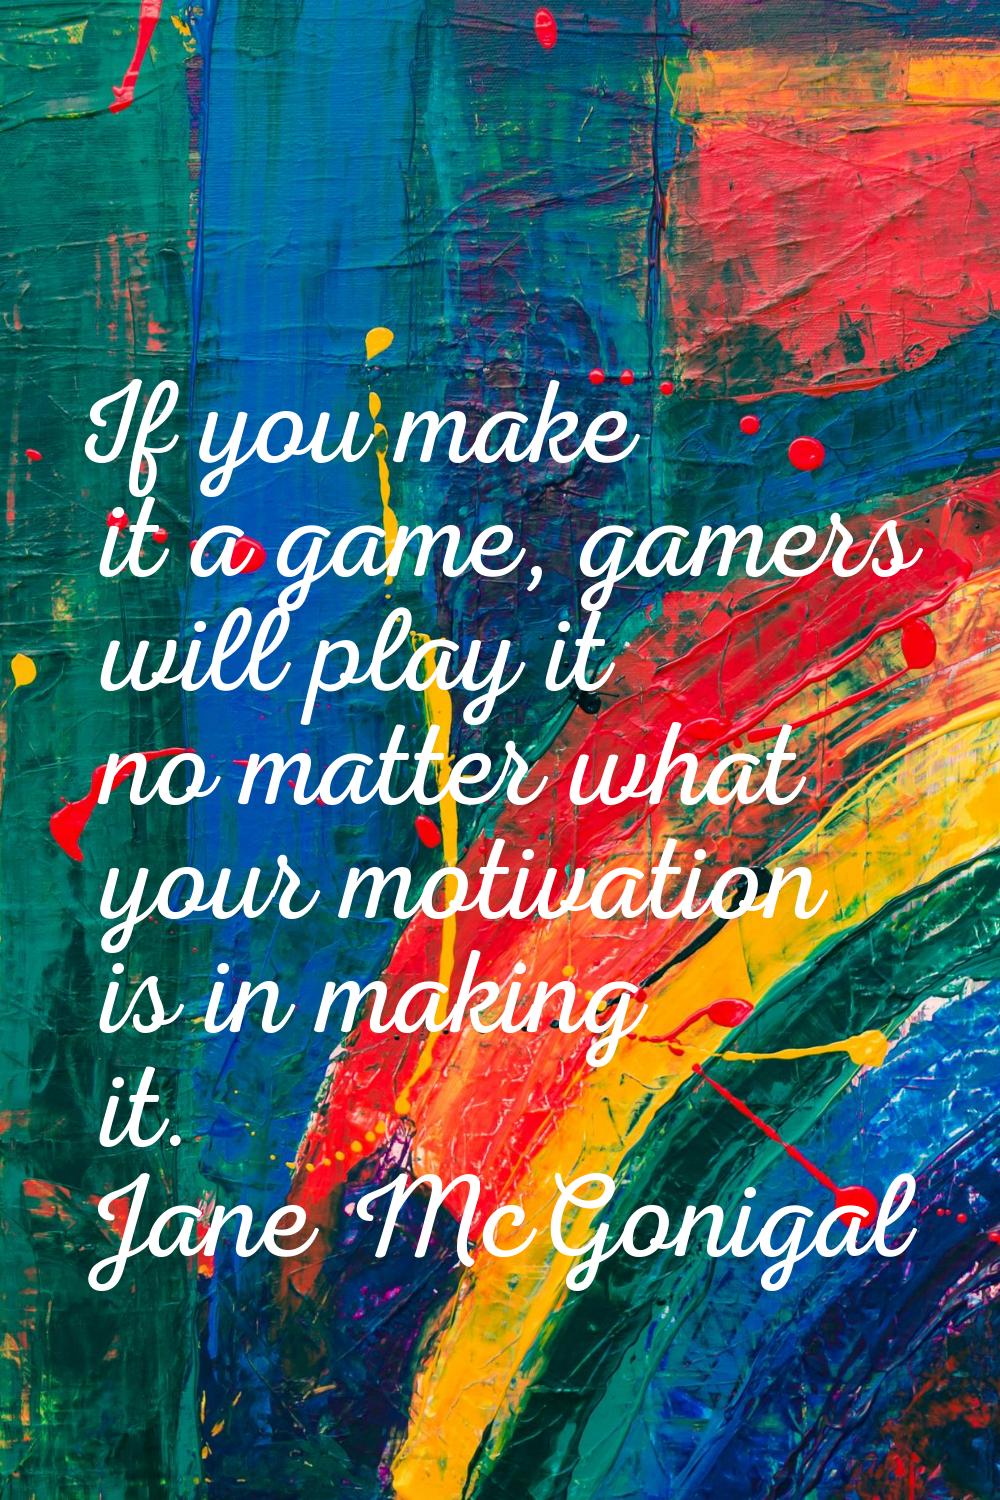 If you make it a game, gamers will play it no matter what your motivation is in making it.